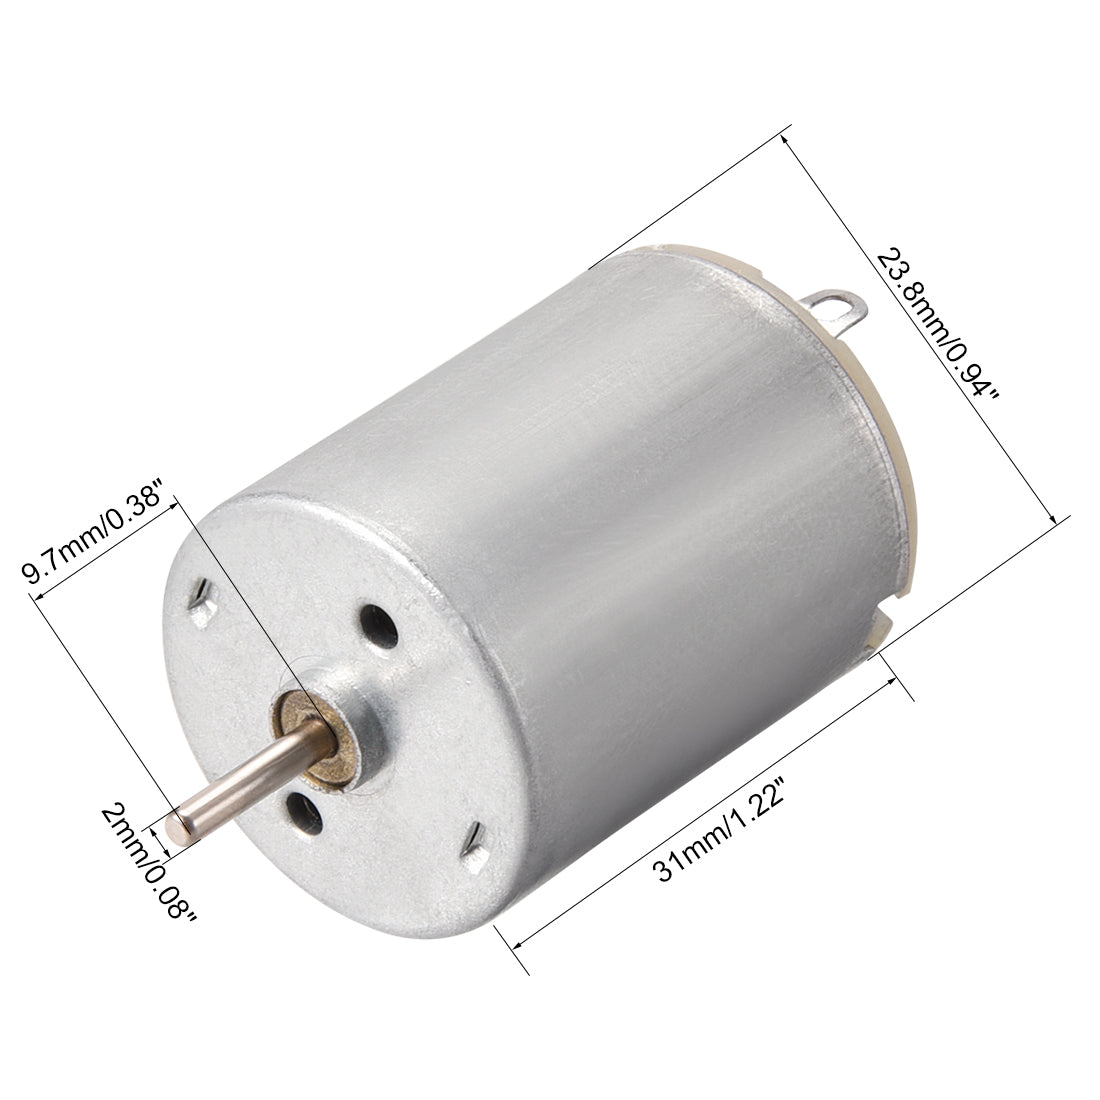 uxcell Uxcell DC Motor 3V 19000RPM 0.7A Electric Motor Round Shaft for RC Boat  Model DIY Hobby 2Pcs